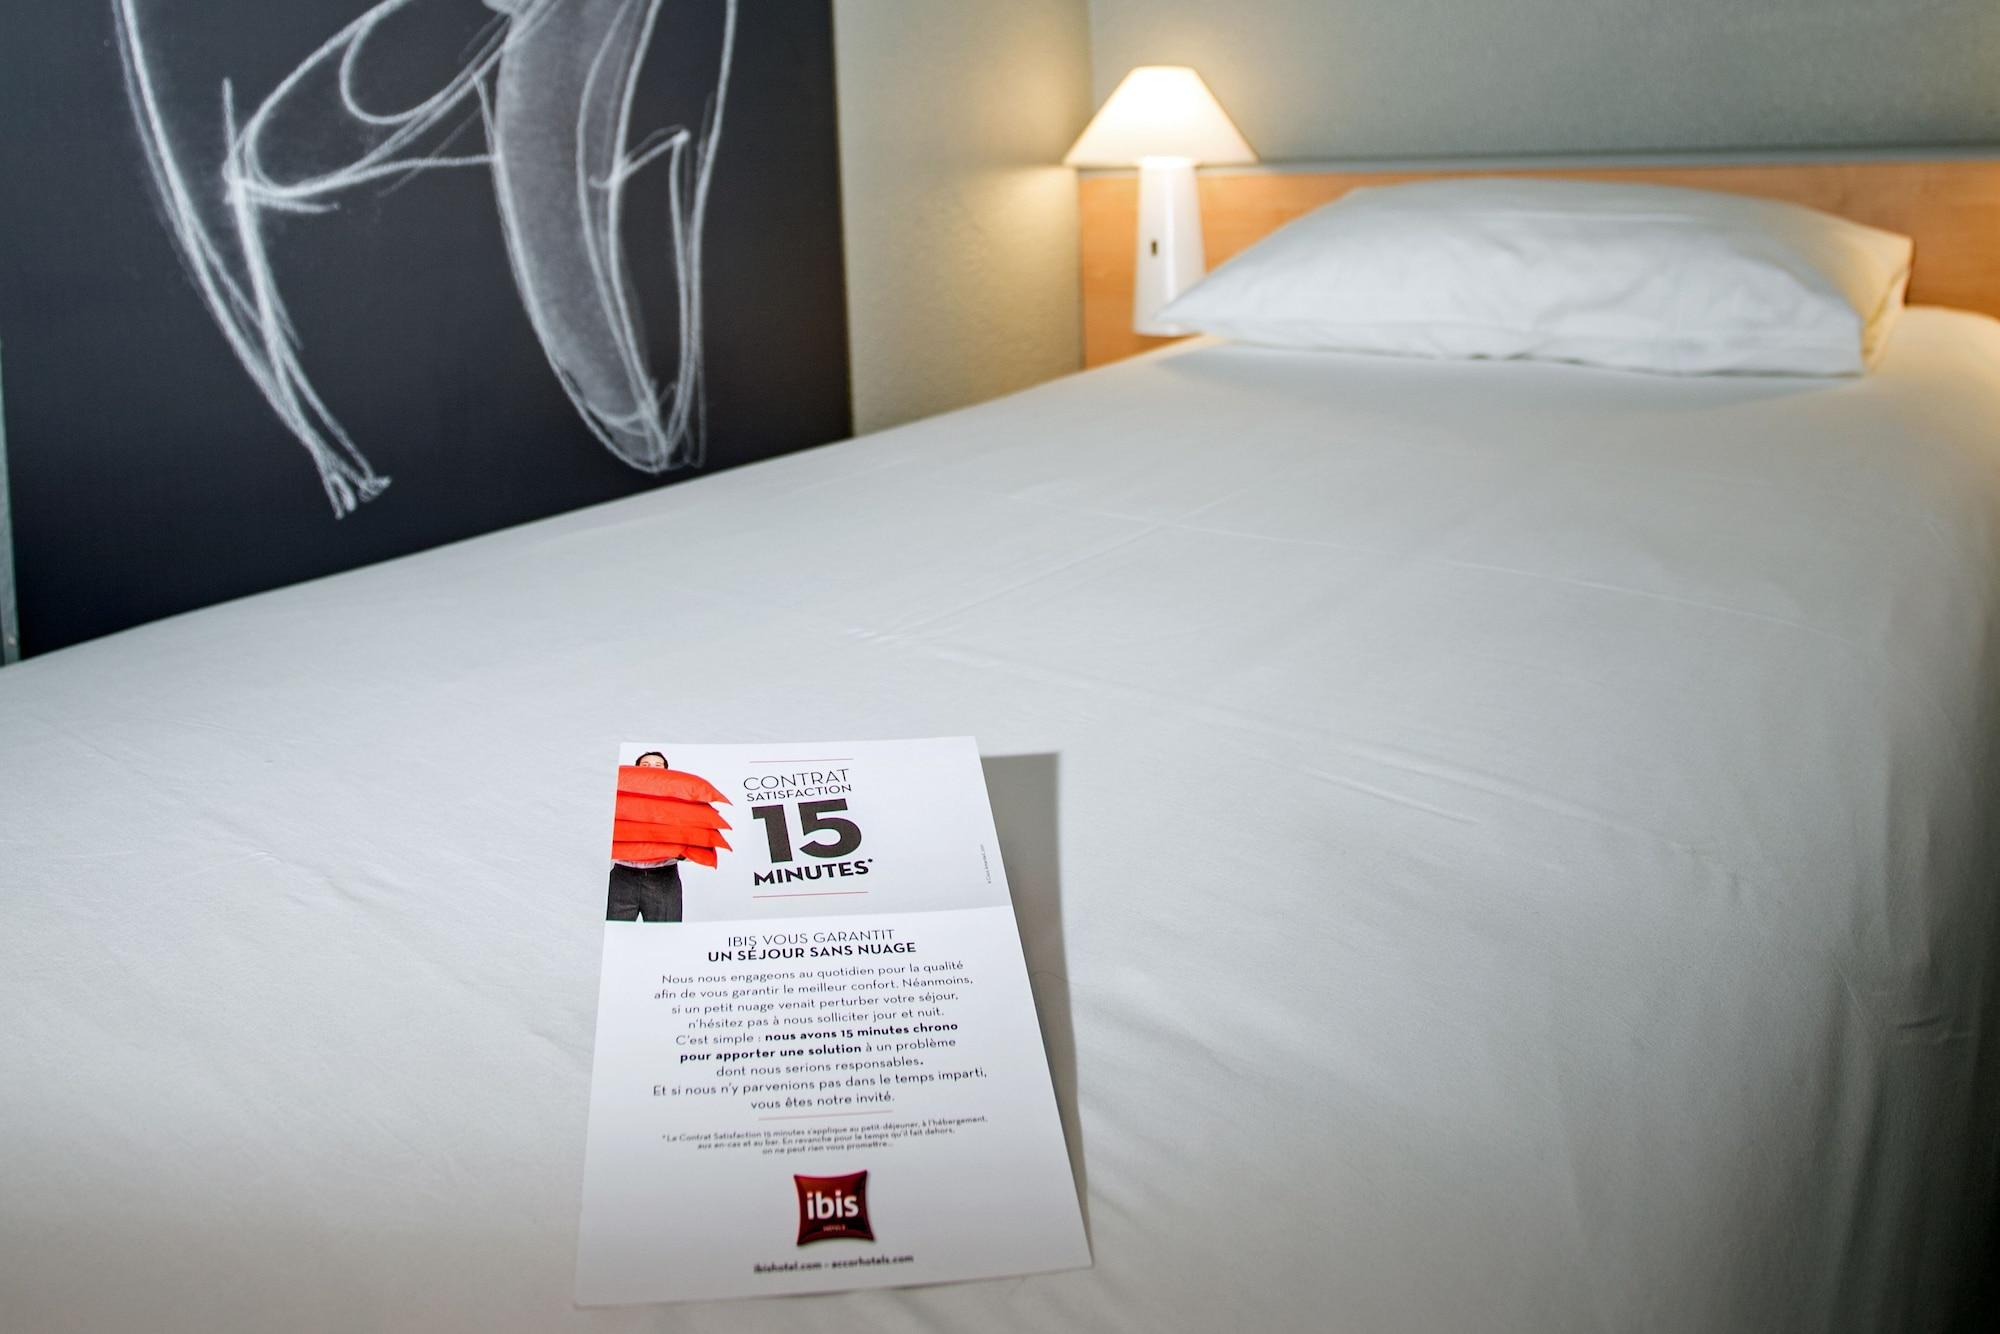 Ibis Nimes Ouest - A9 Hotel Exterior foto